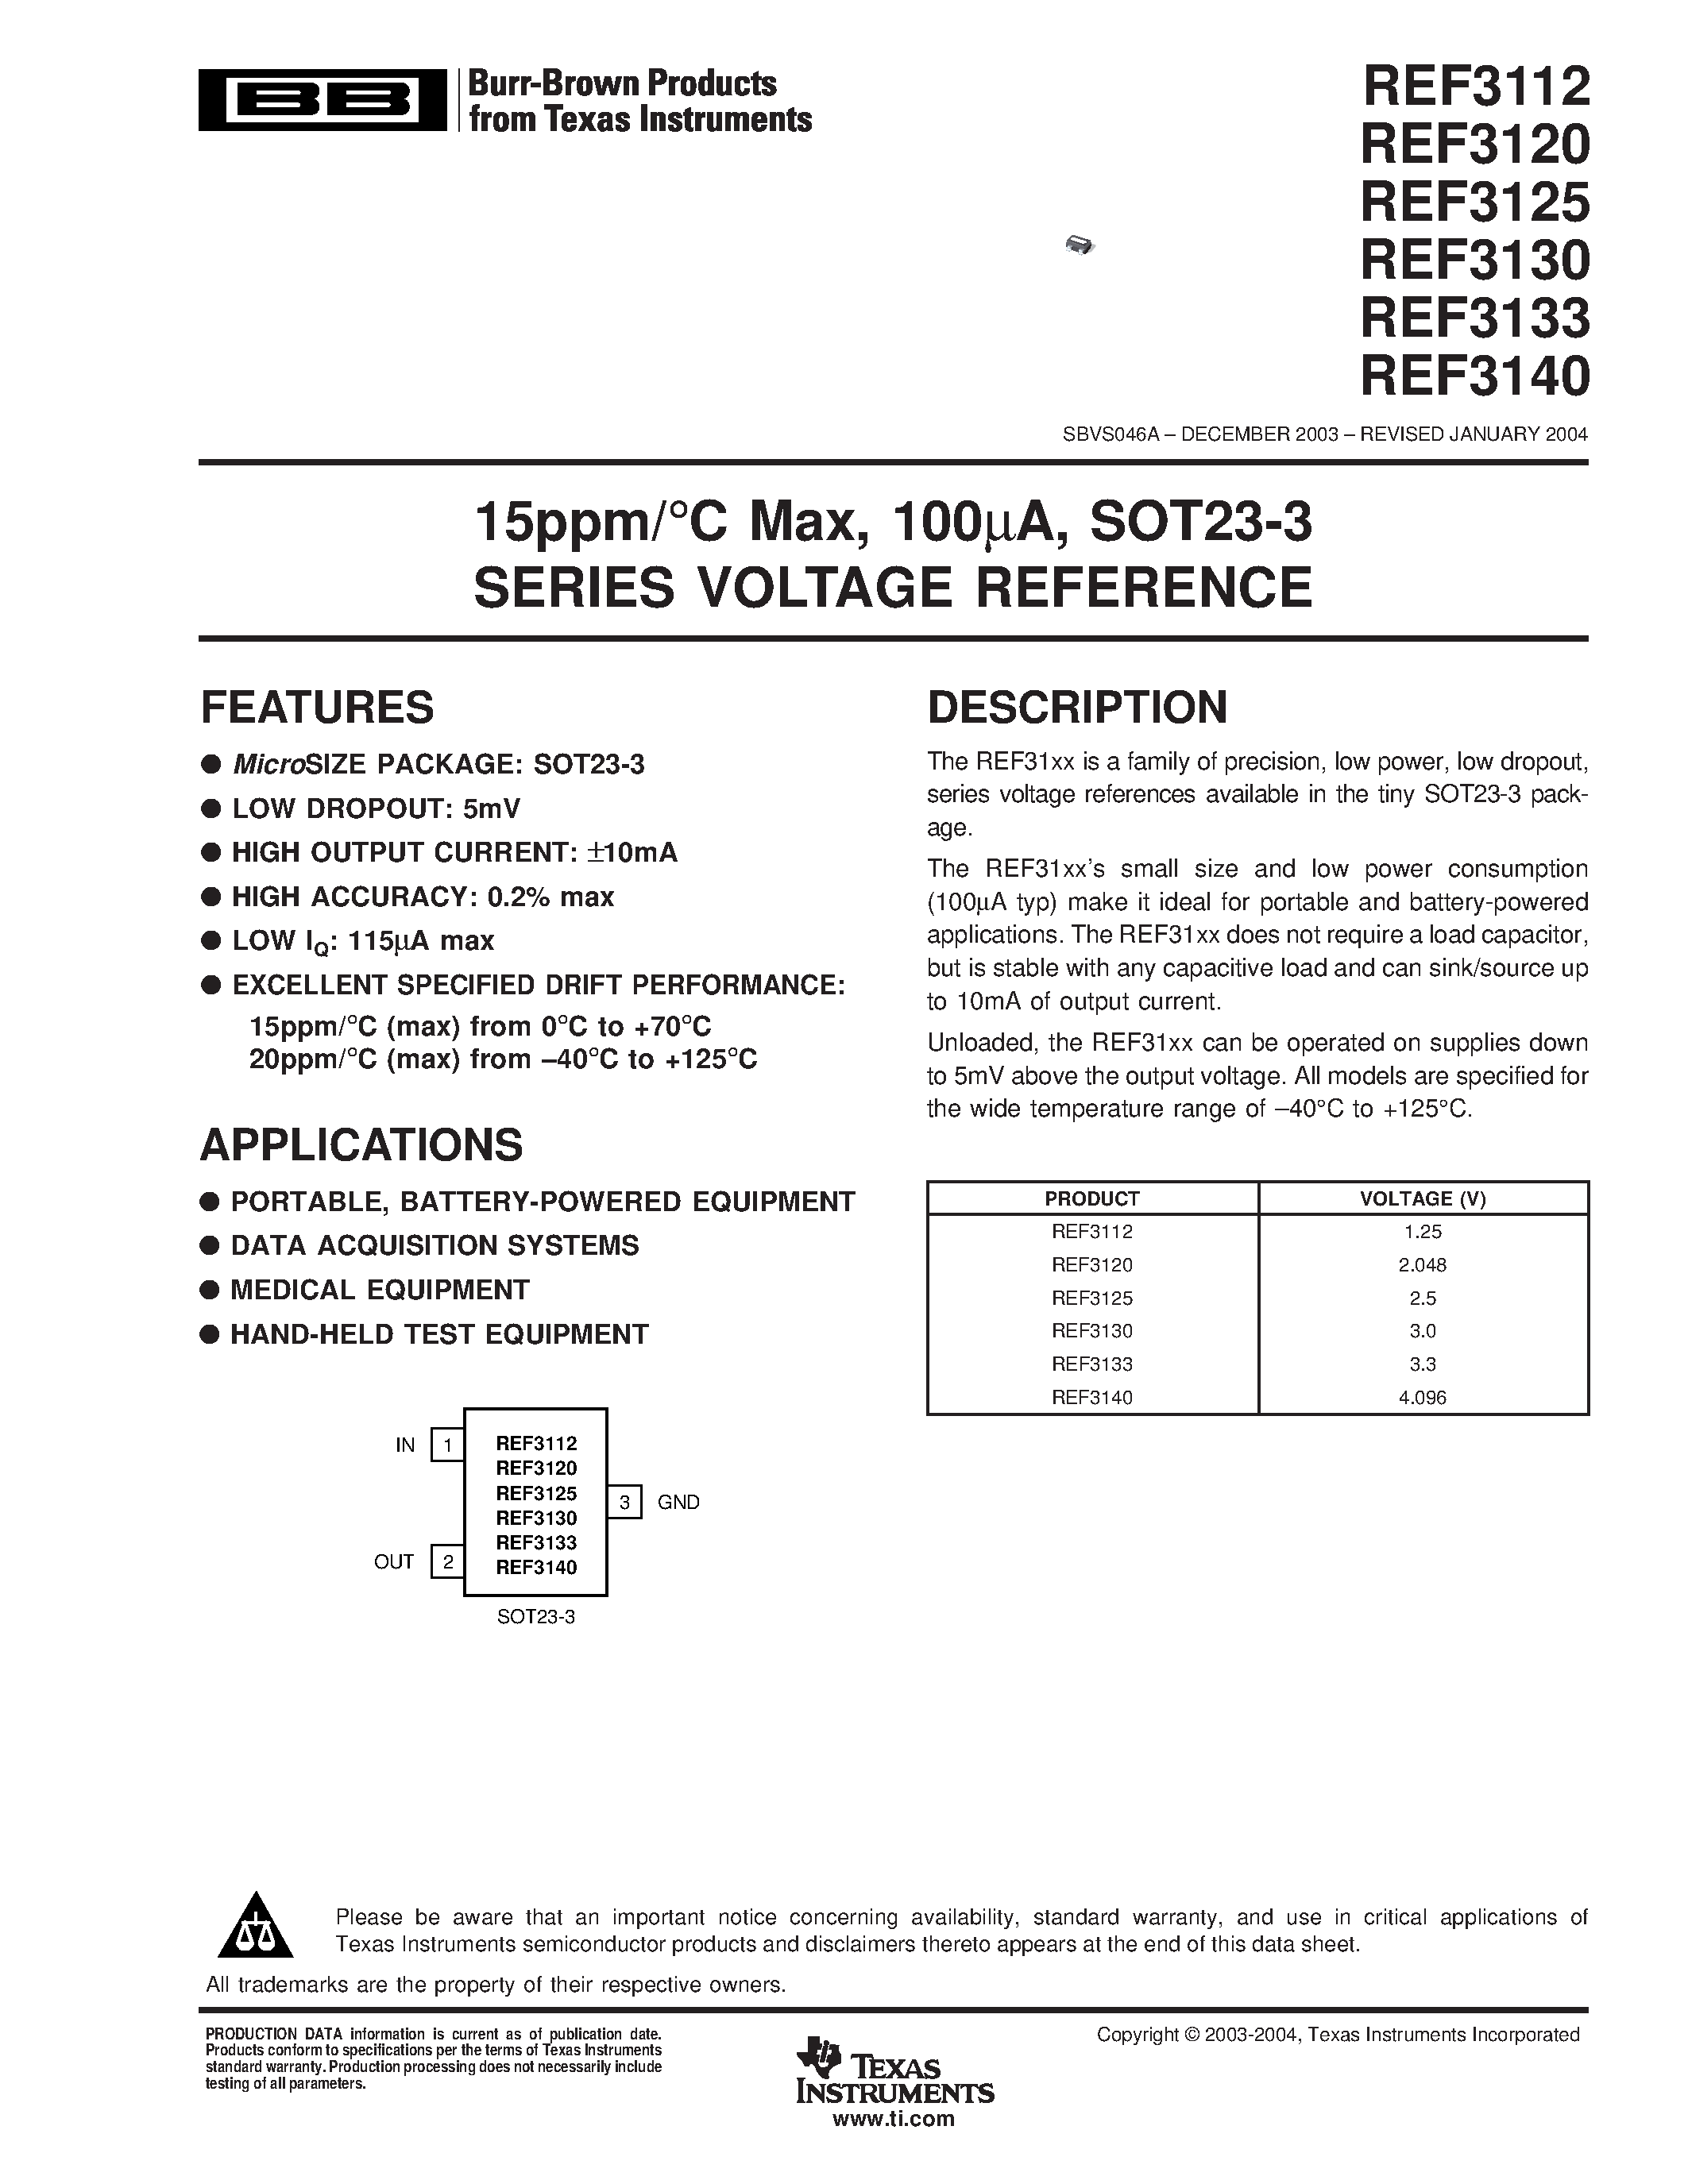 Даташит REF3130AIDBZT - 15ppm/C Max/ 100UA/ SOT23-3 SERIES VOLTAGE REFERENCE страница 1